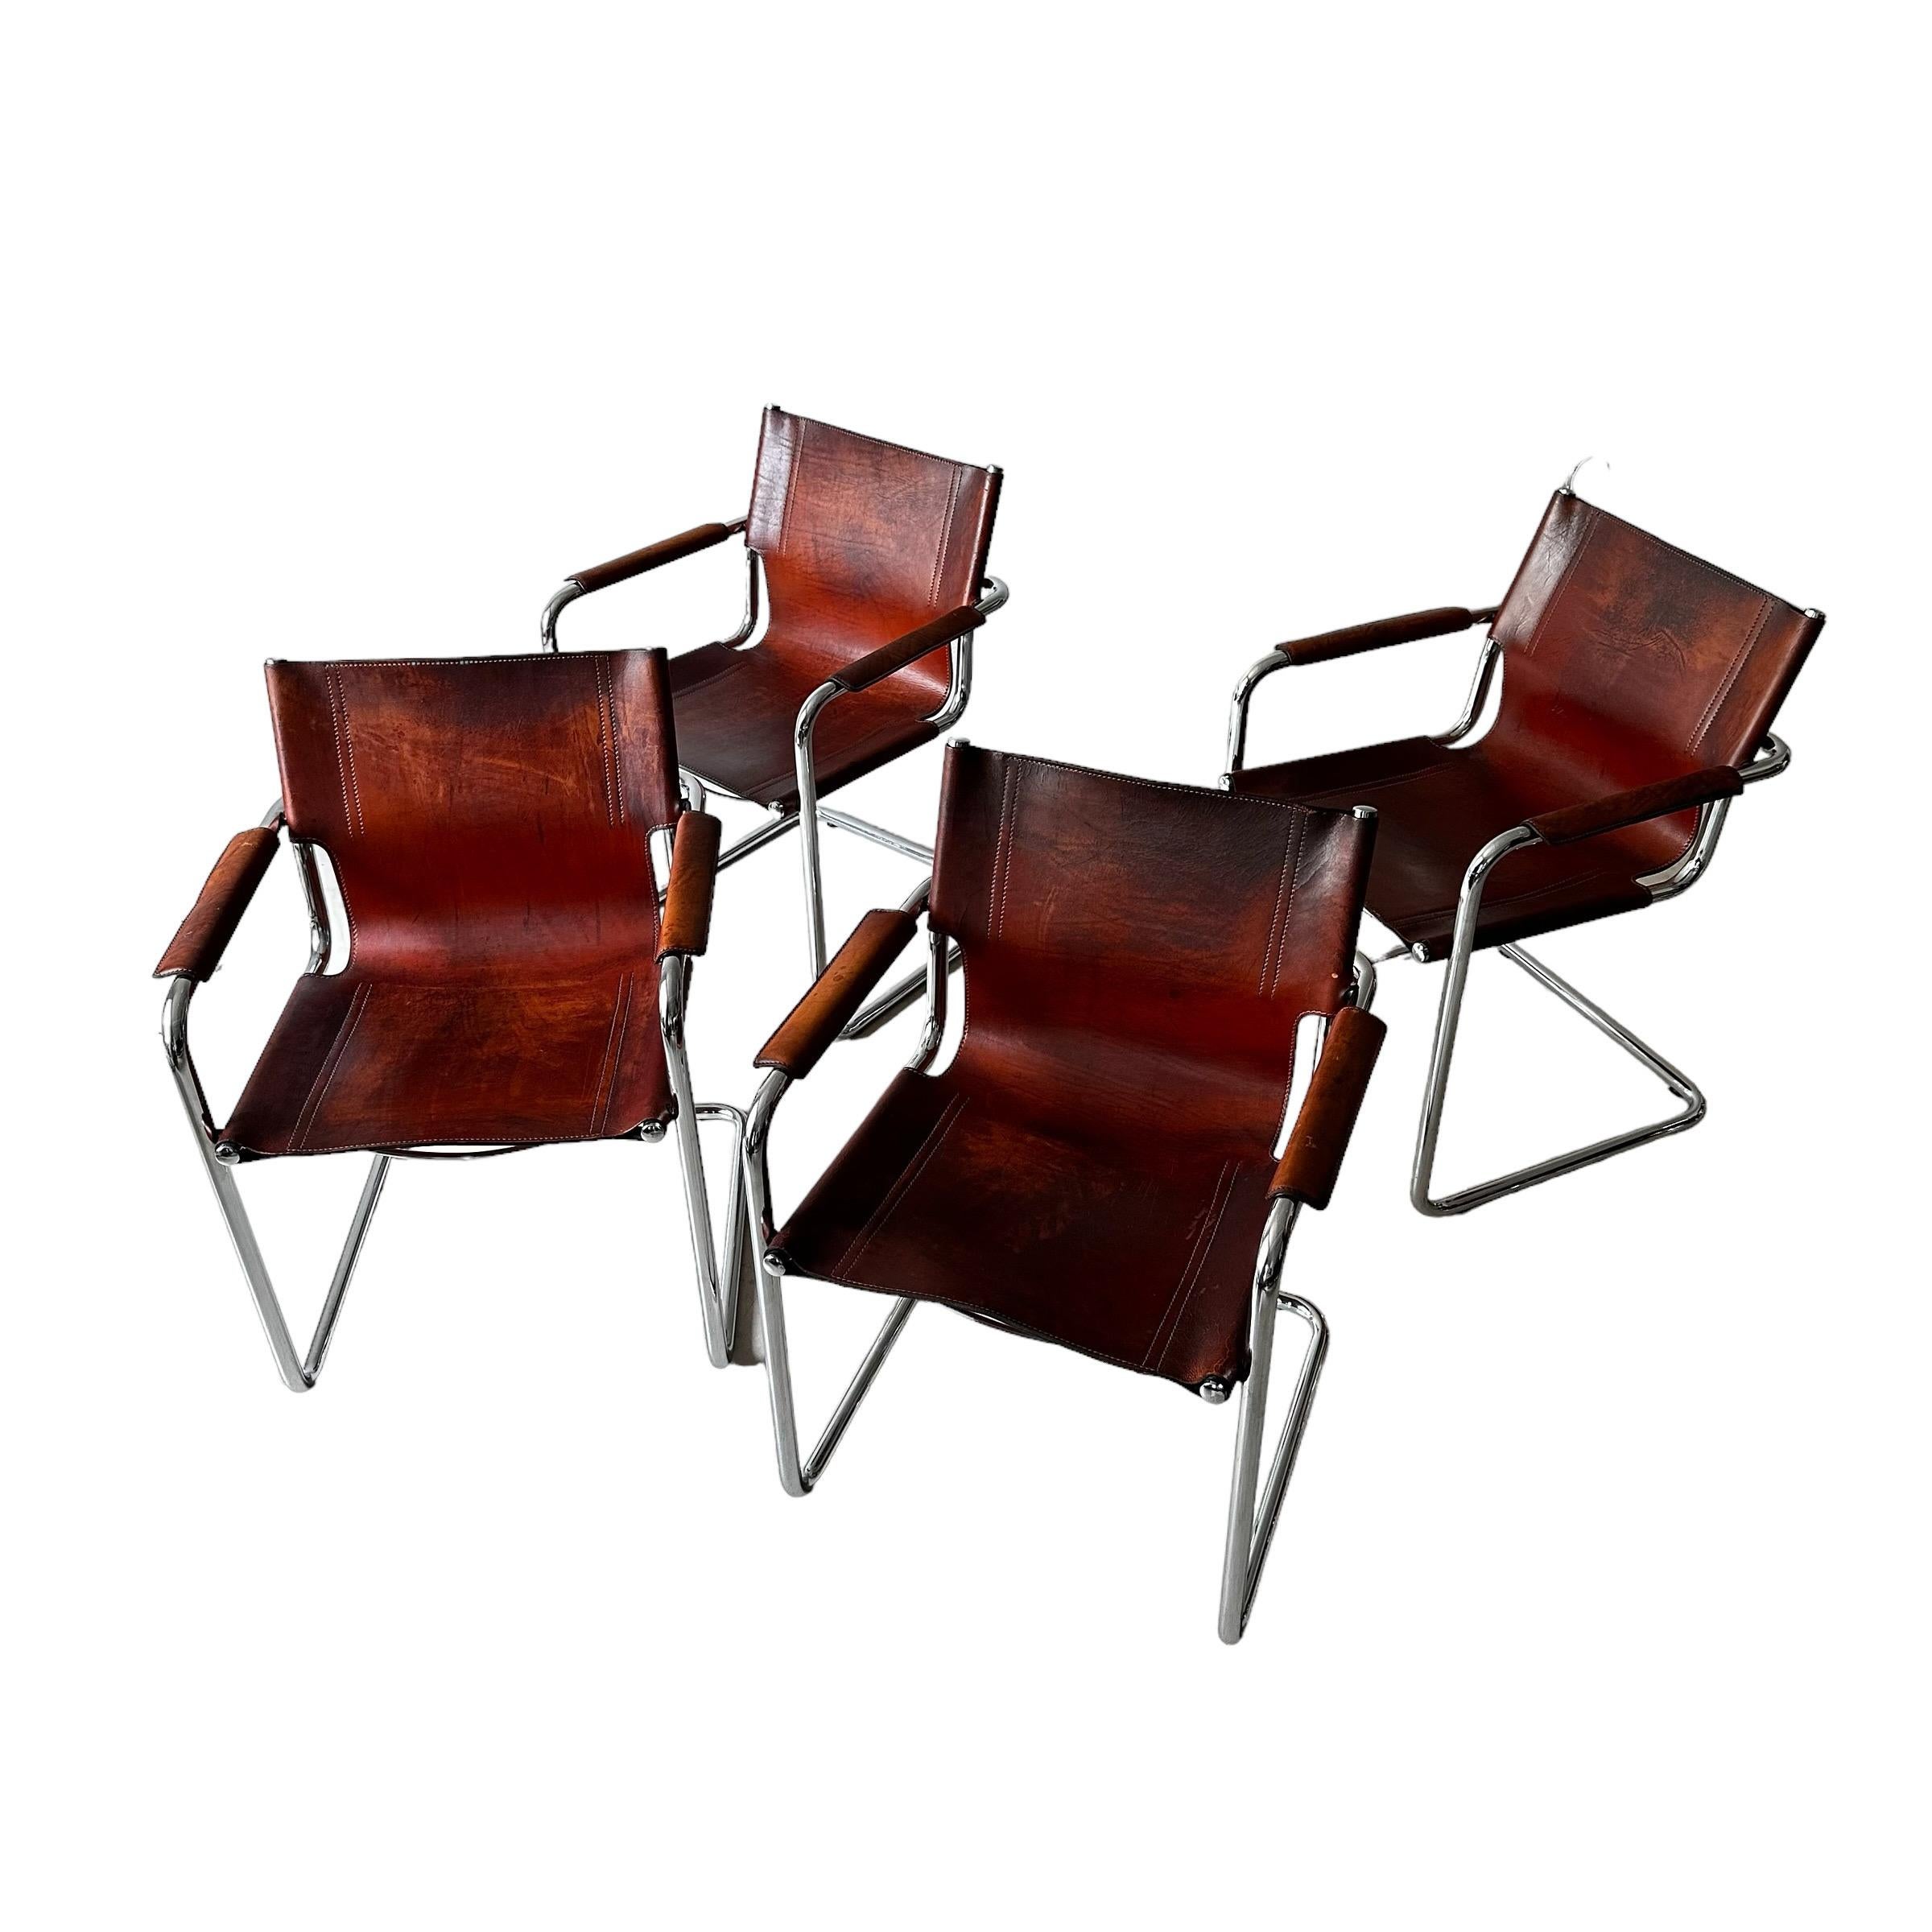 Matteo Grassi, Set of 4 Armchairs in Patinated Cognac Leather, Italy 1970s For Sale 2